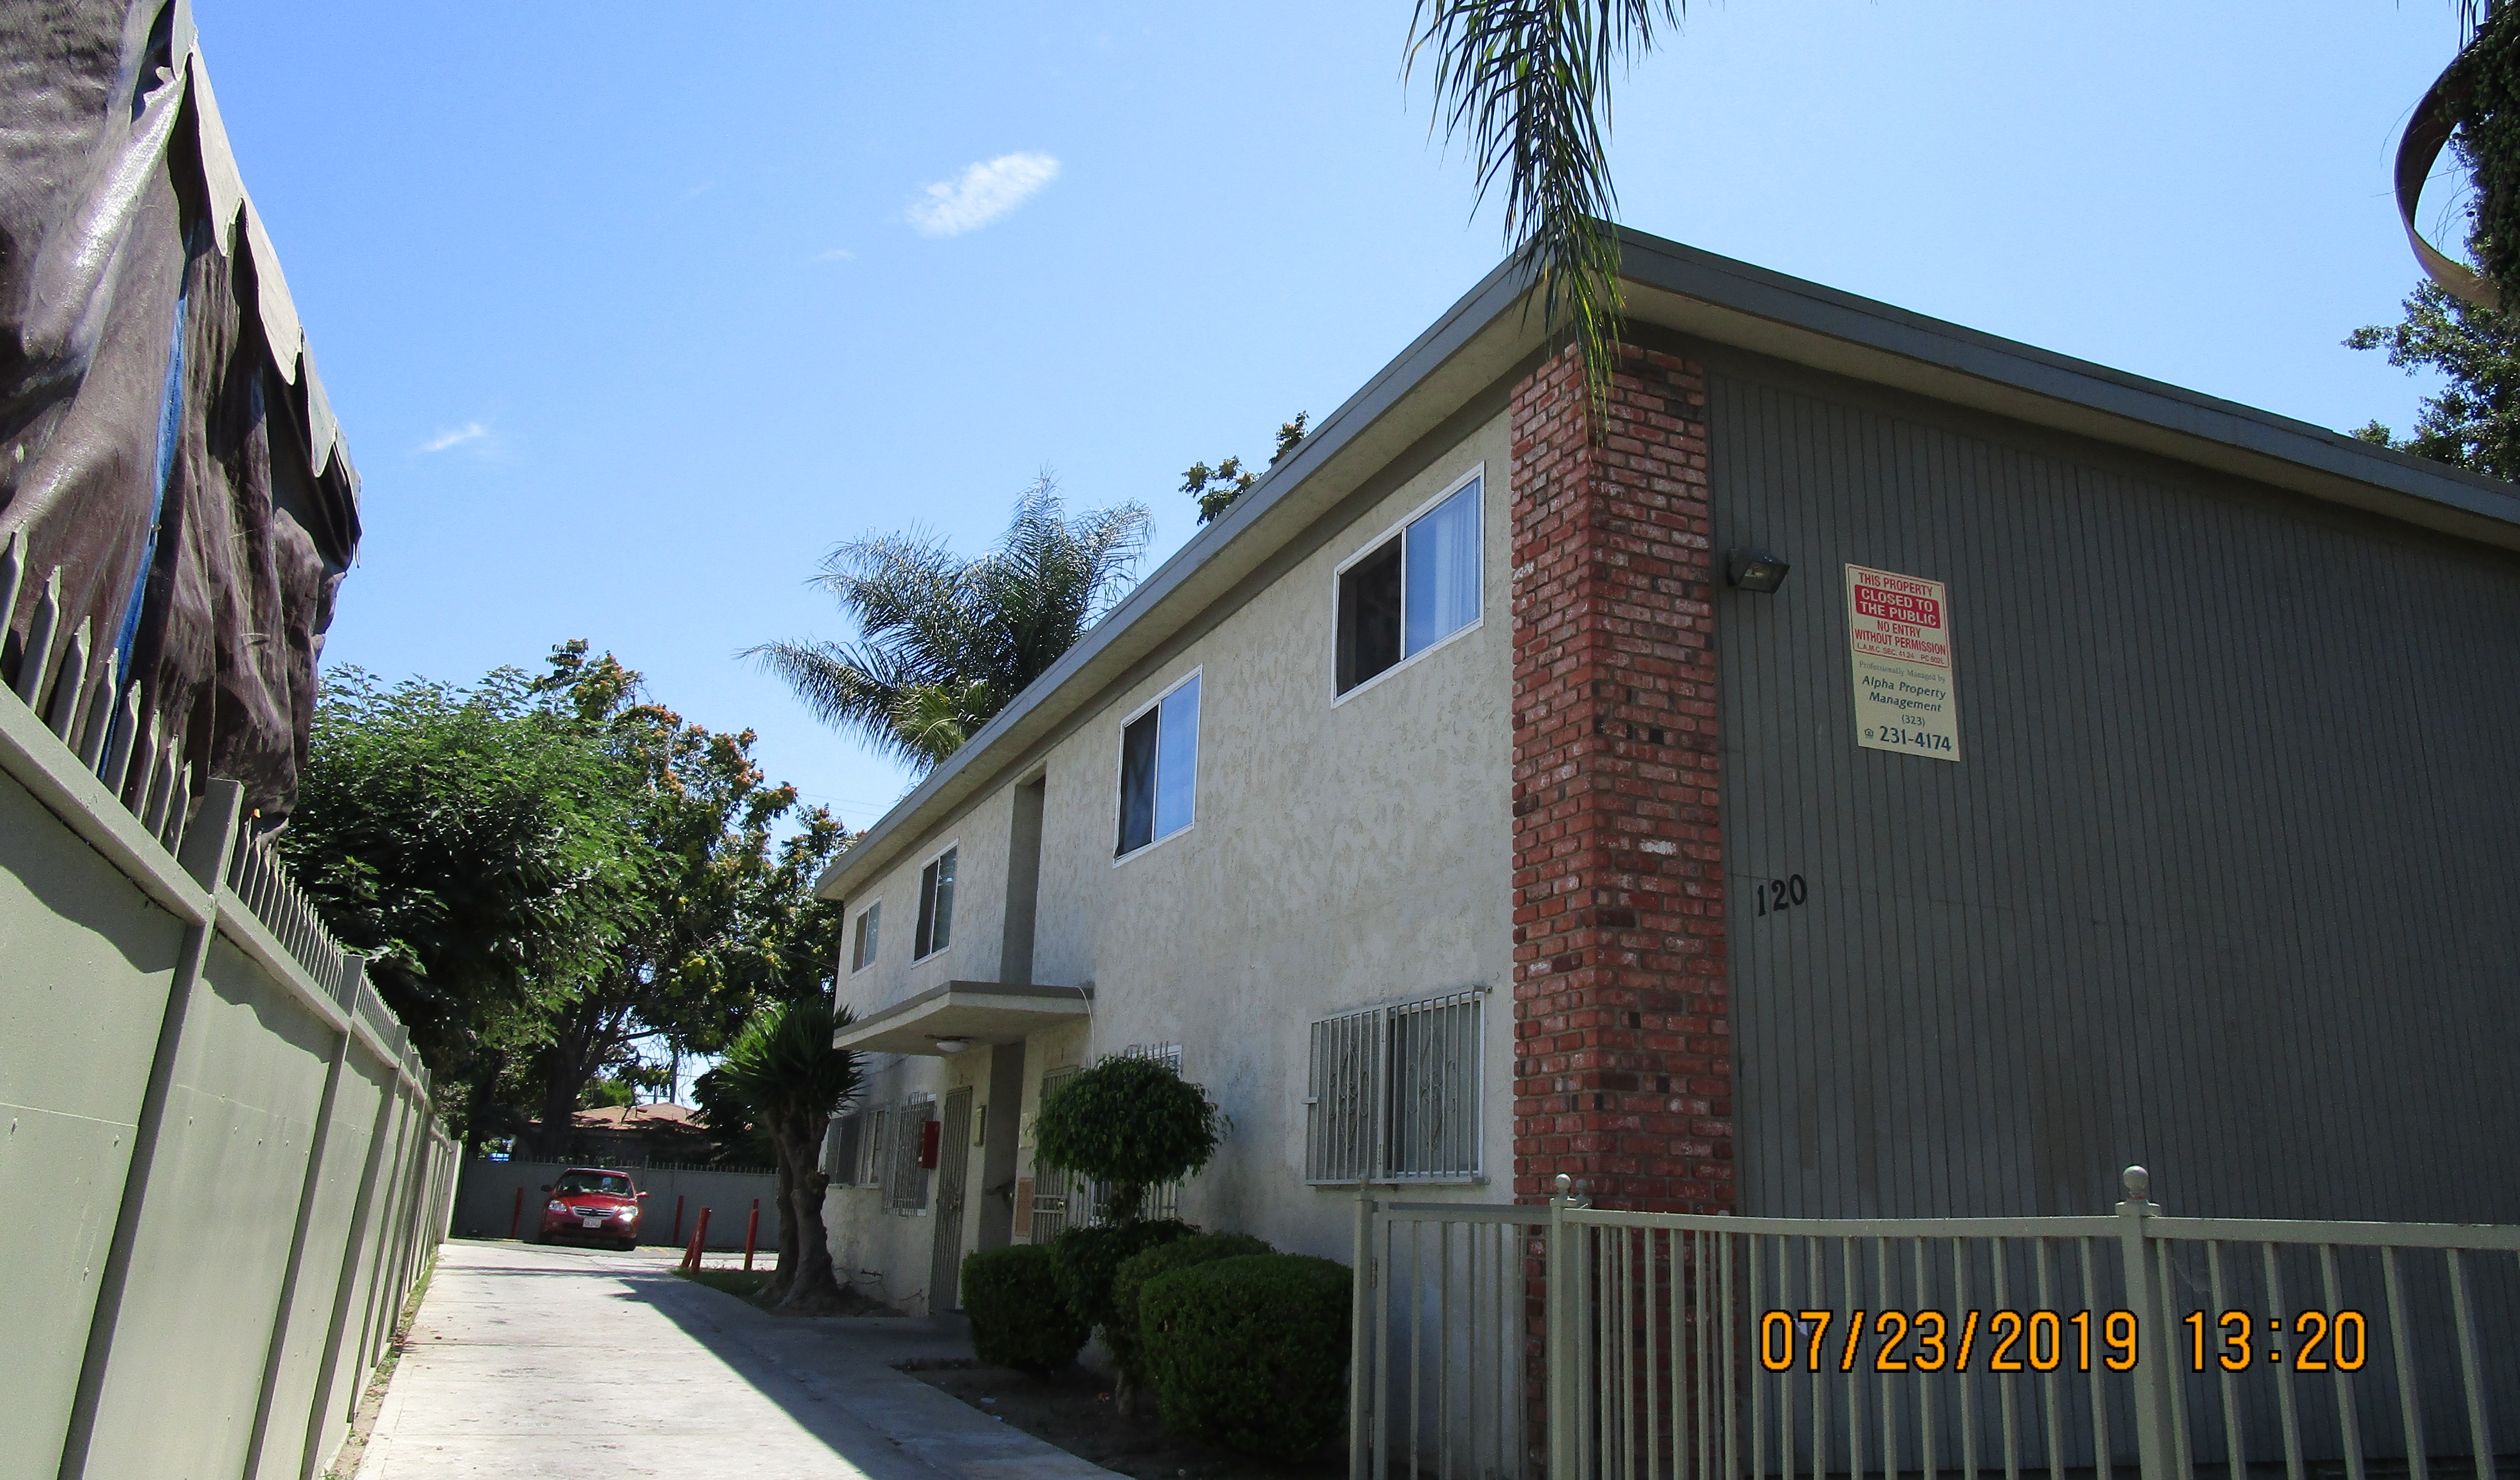 Left side of a beige two story building over looking the driveway, multiple windows in both floors, gated windows on the ground floor, iron screen doors, trees and bushes next to the units, a parked car inside the parking.  Open gate, closed to the public.